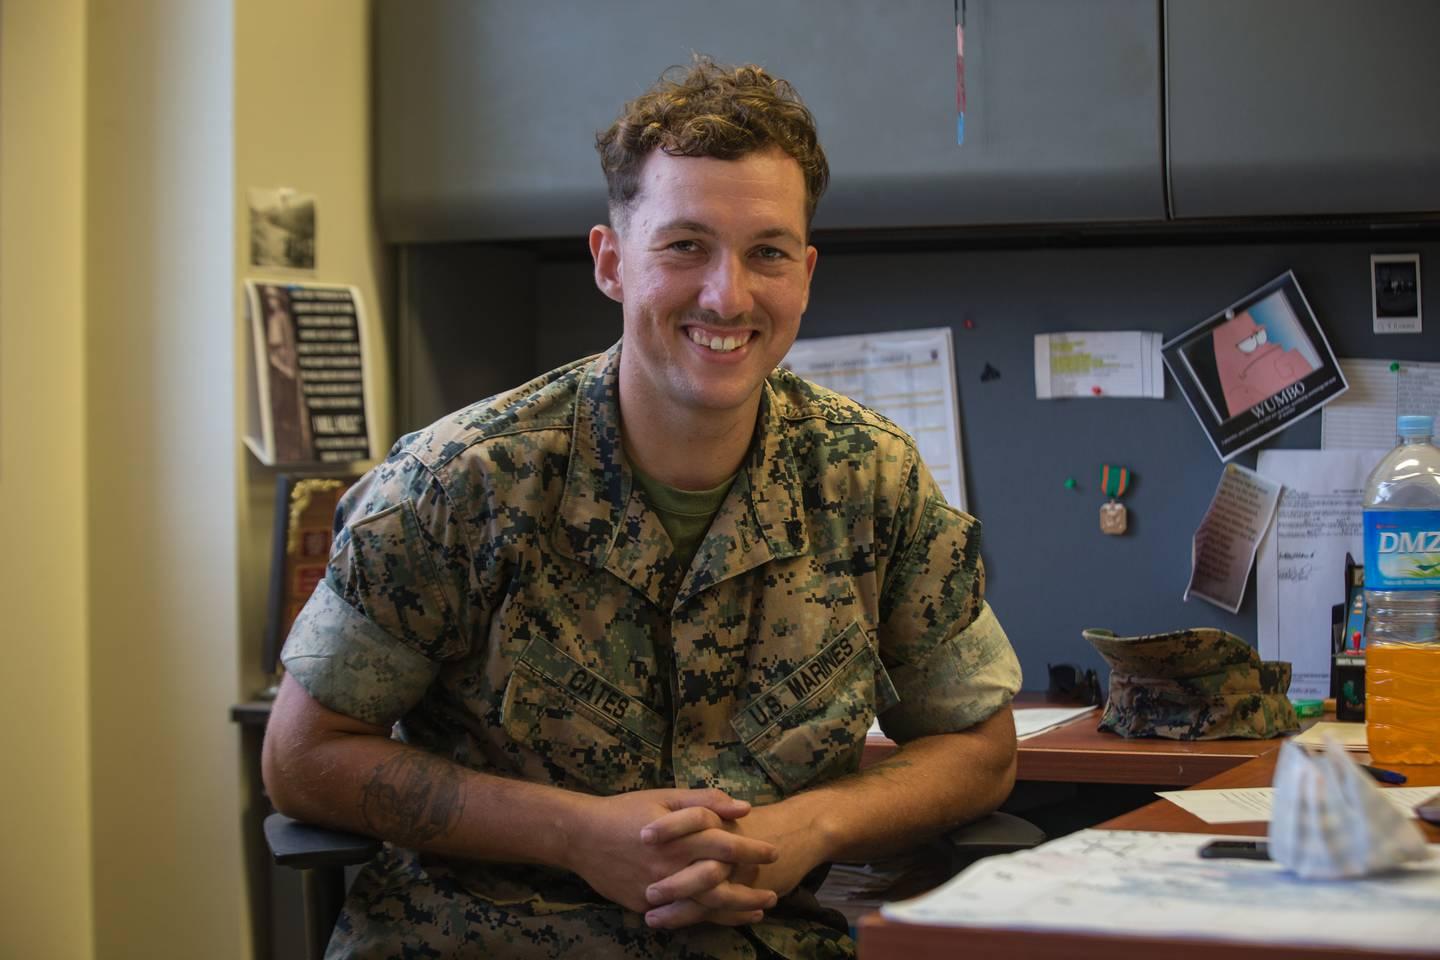 Marine Cpl. James G. Cates is a licensing noncommissioned officer with Combat Logistics Regiment 3, 3rd Marine Logistics Group, and experienced swimmer. Cates recently saved the life of another Marine during a riptide inci Marine saves fellow Devil Dog from drowning during Okinawa snorkeling trip